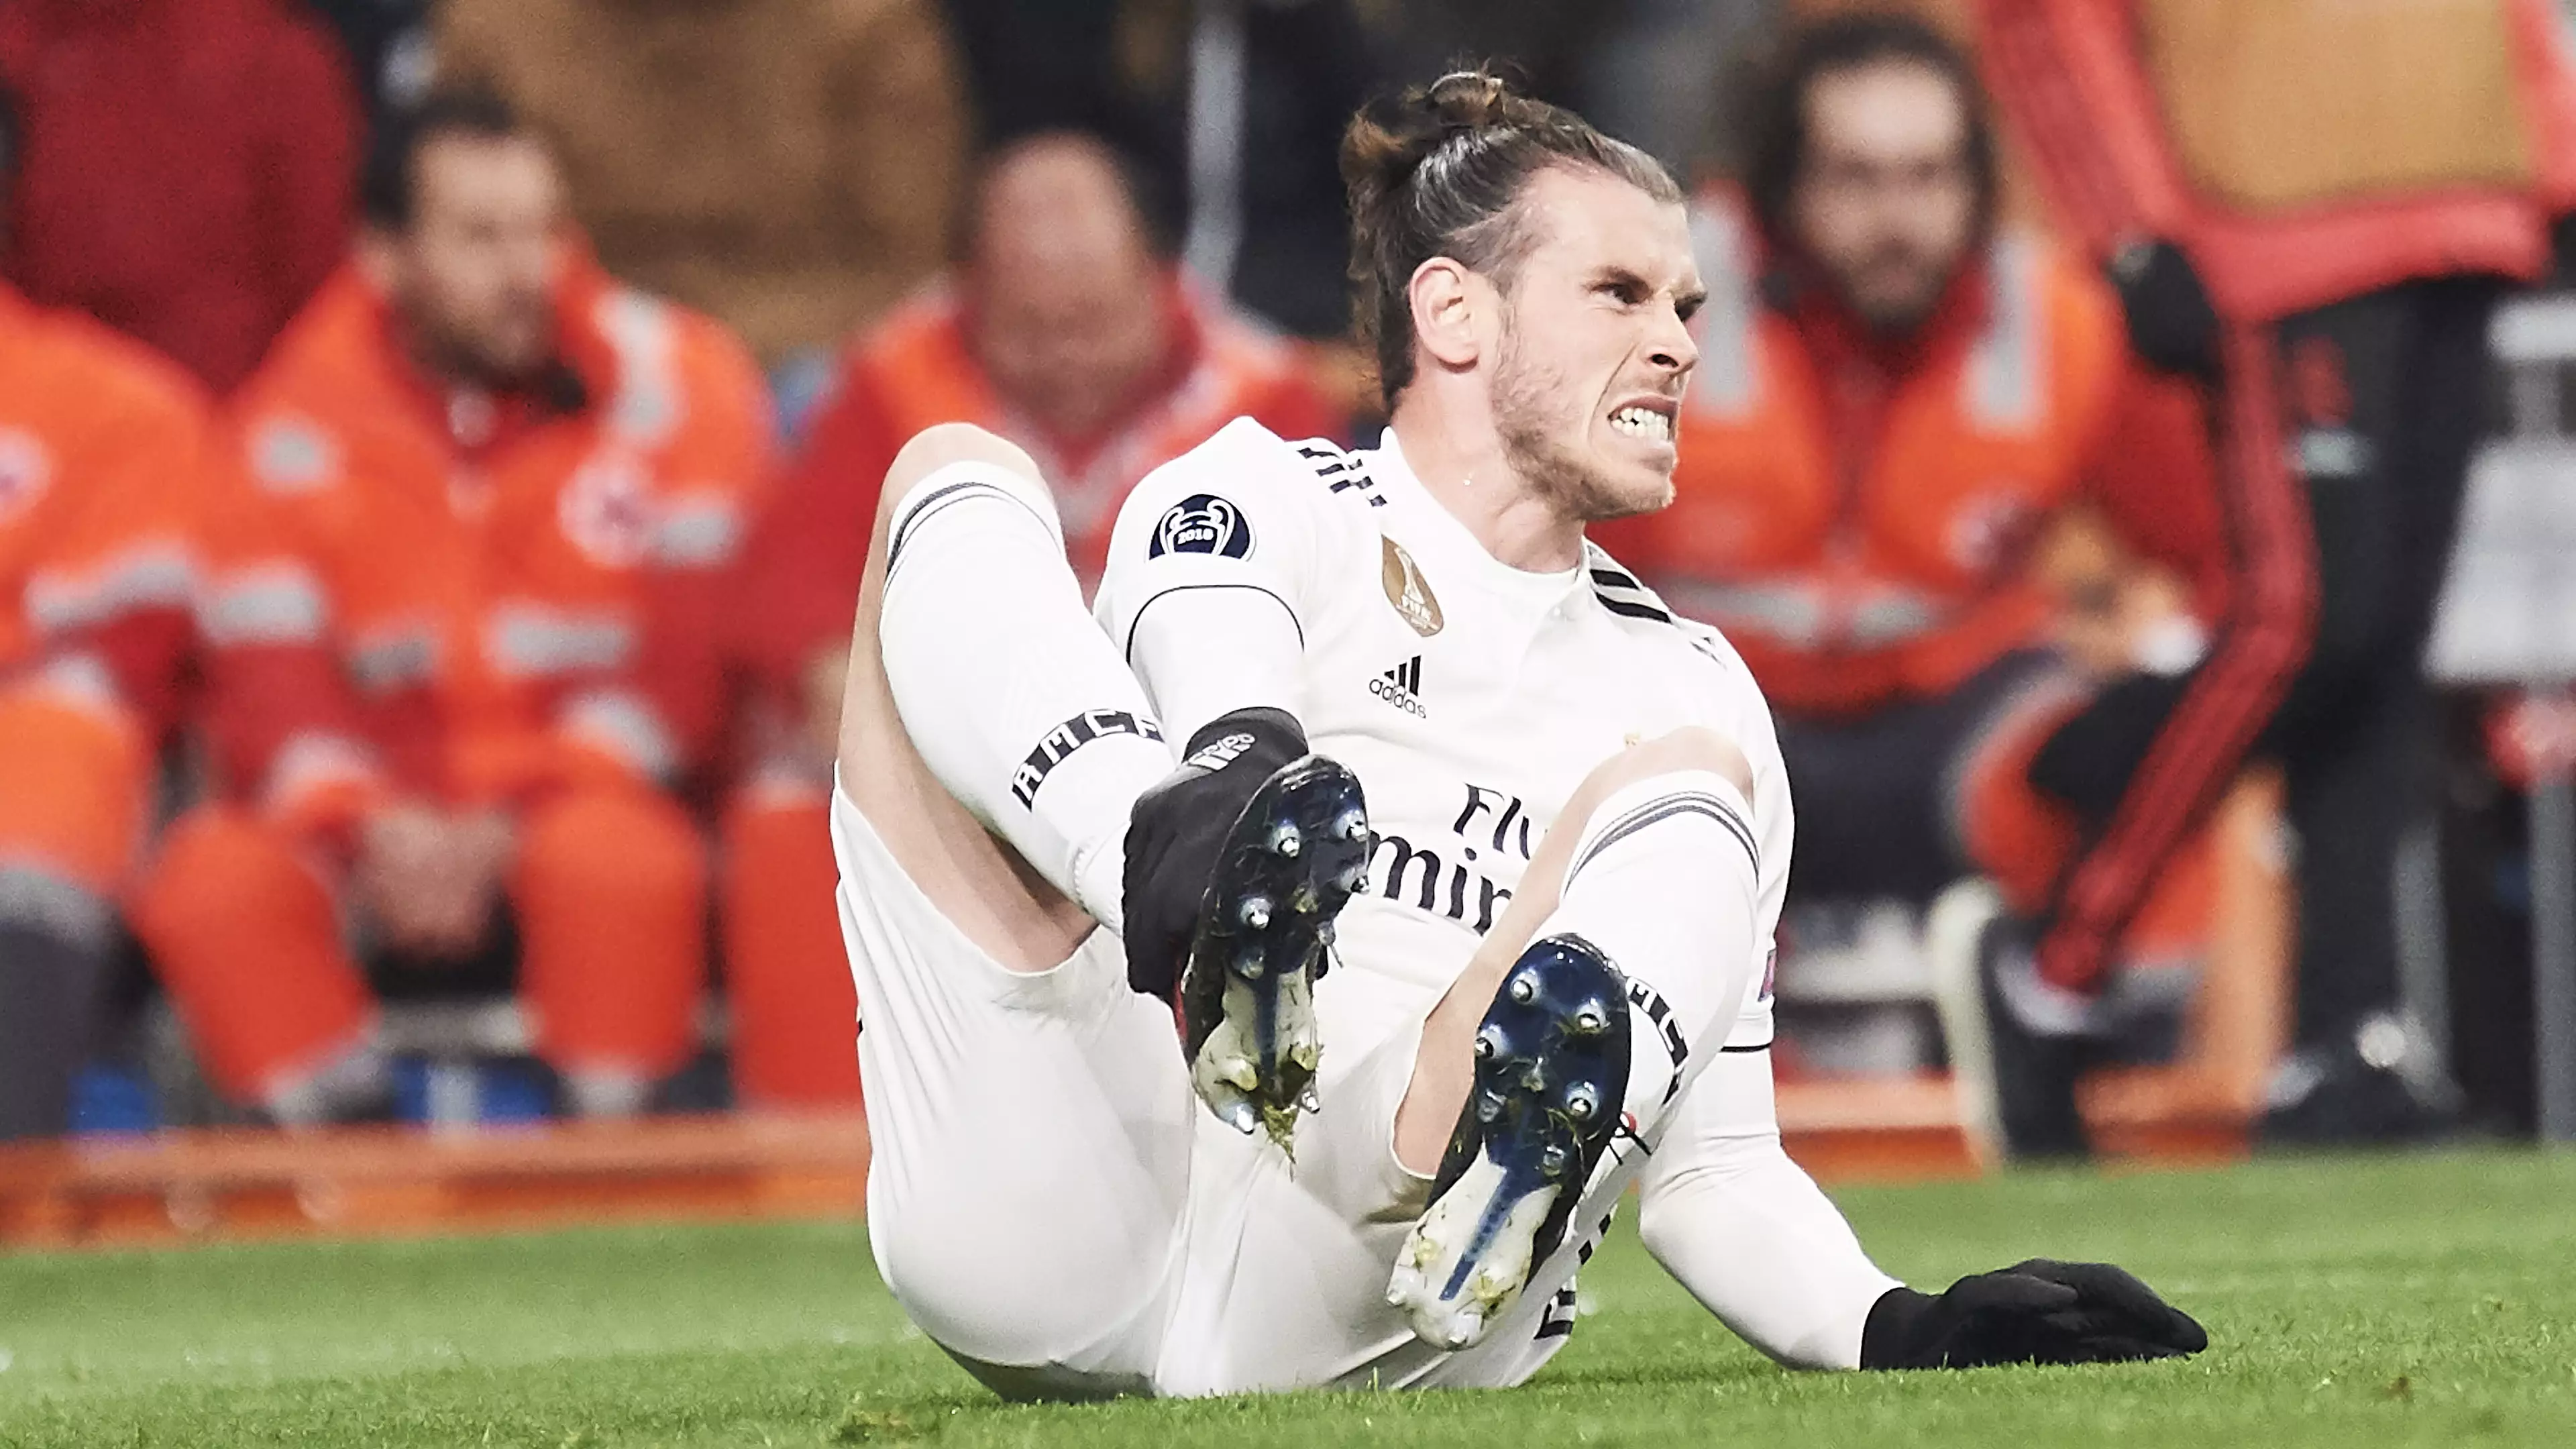 Spanish Media Give Gareth Bale A New Nickname And It's Brutal